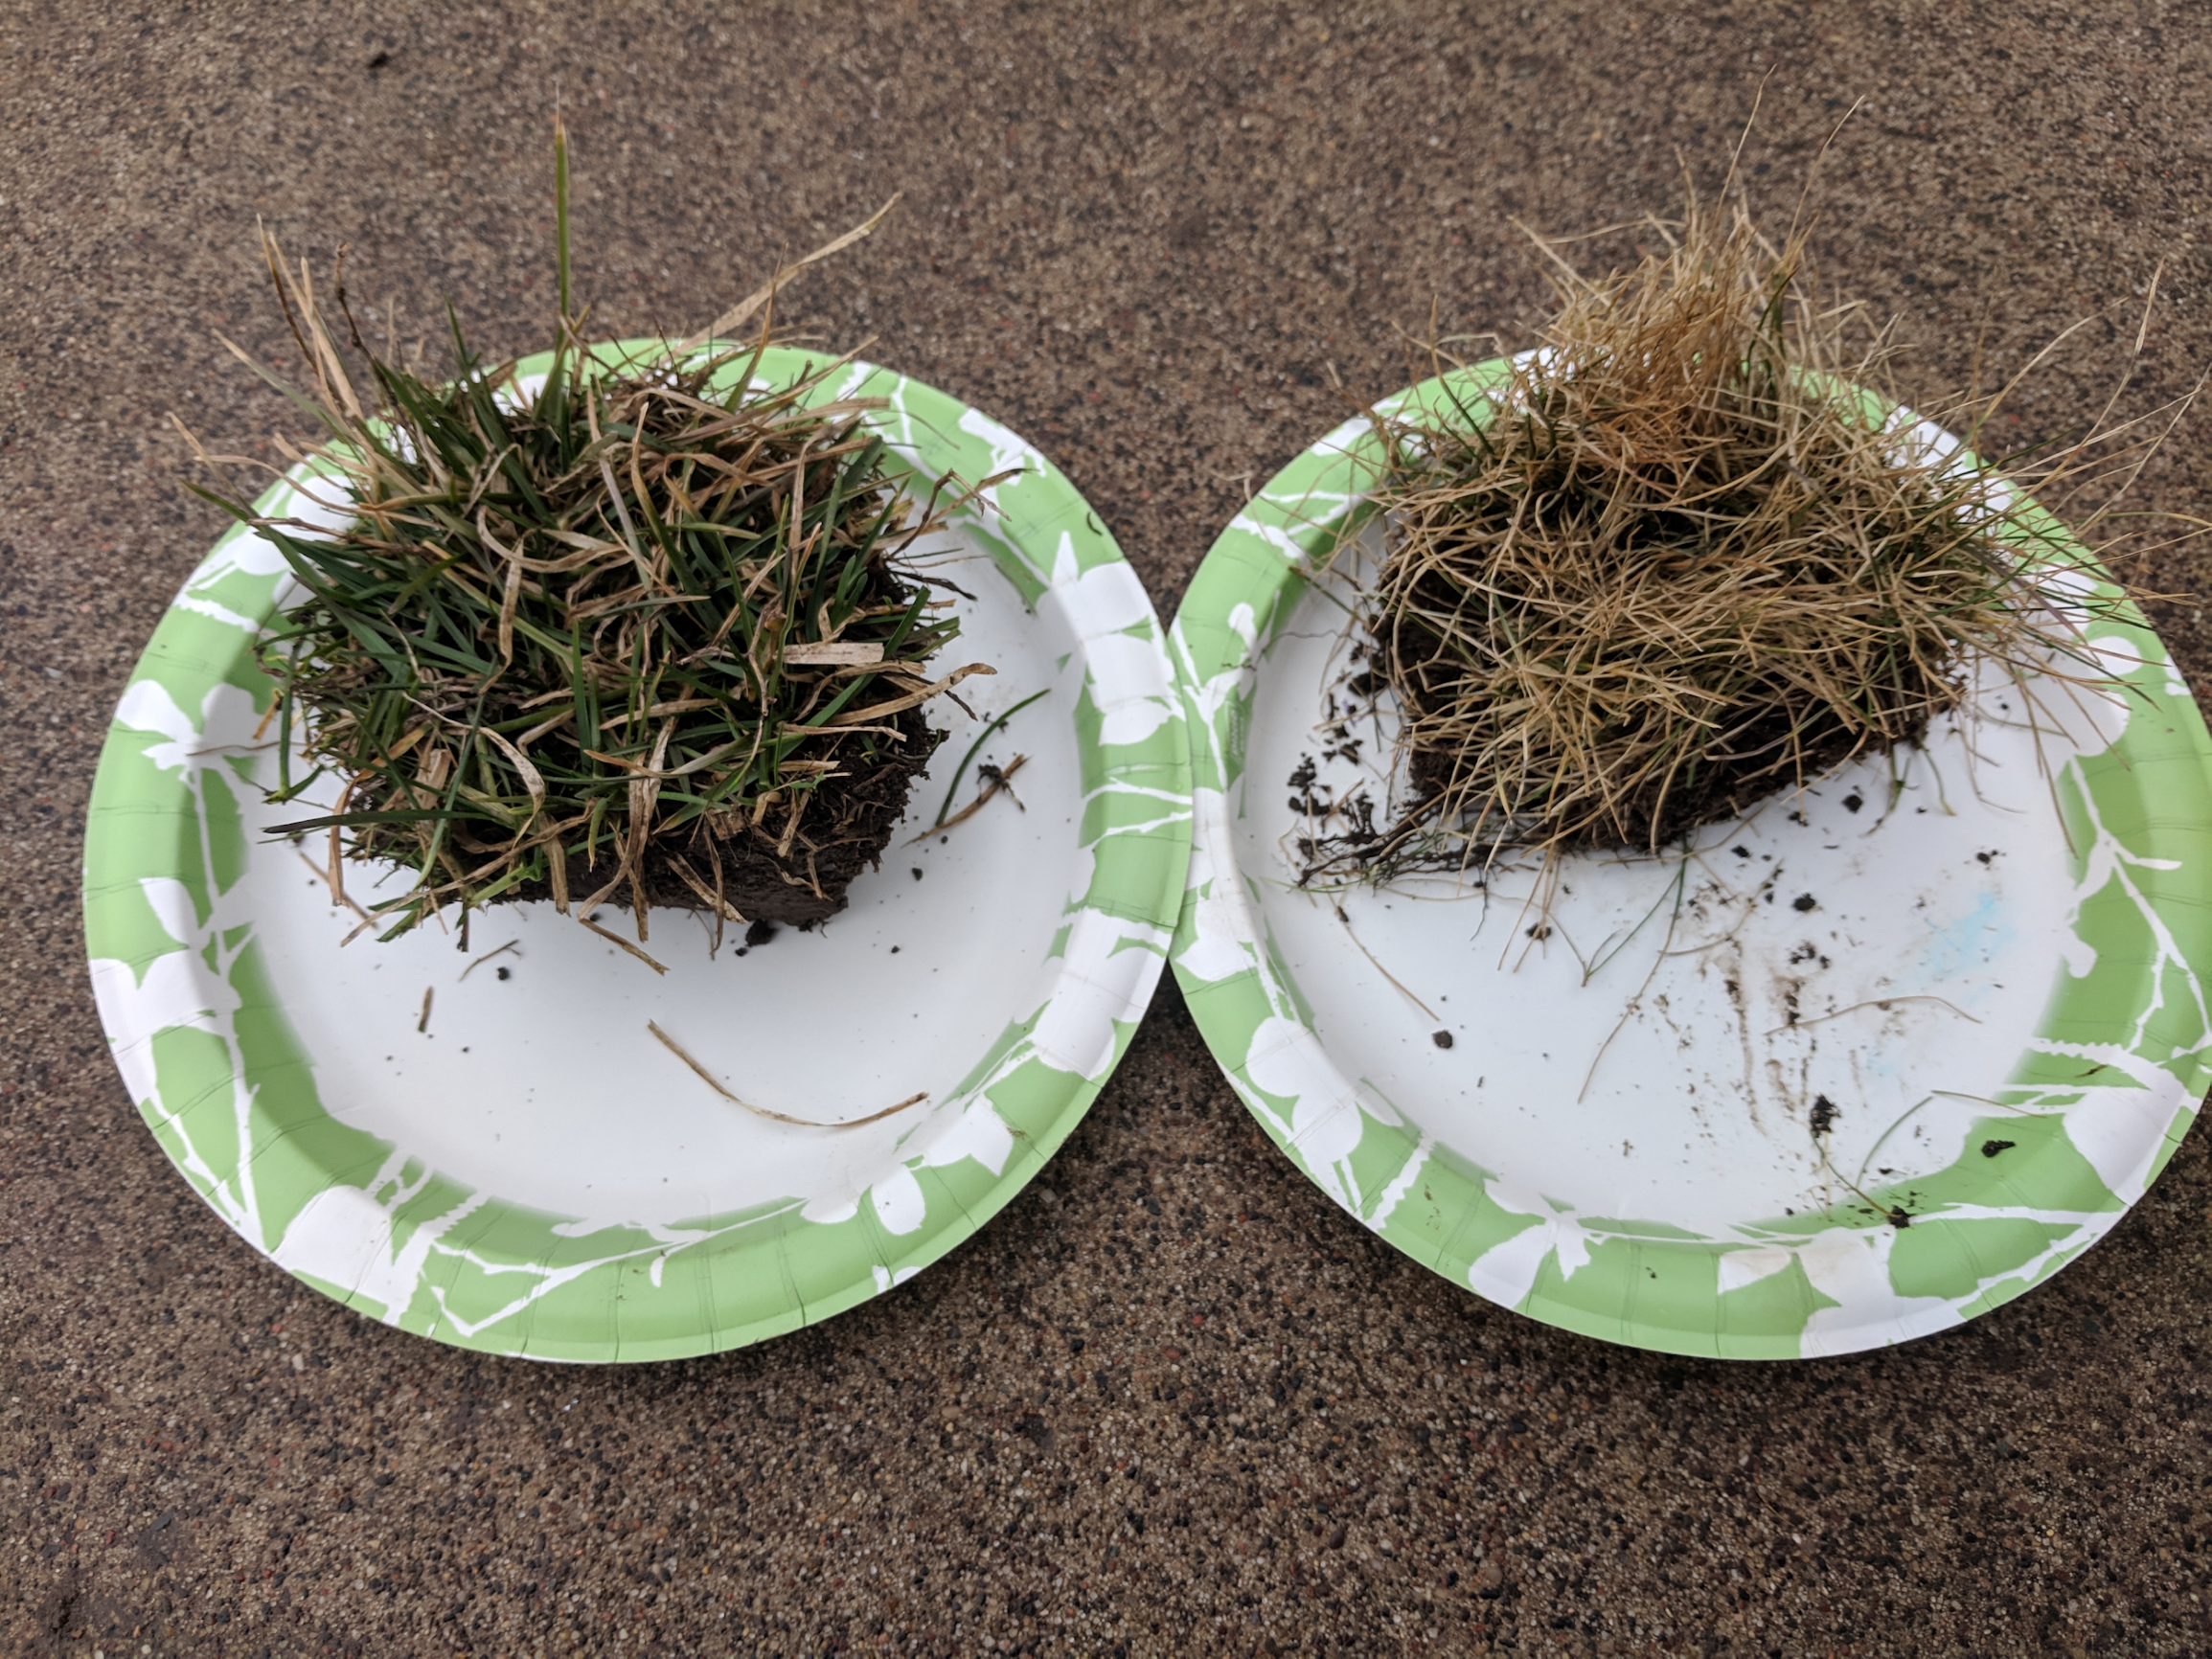 two paper plates each with a clump of sod after winter